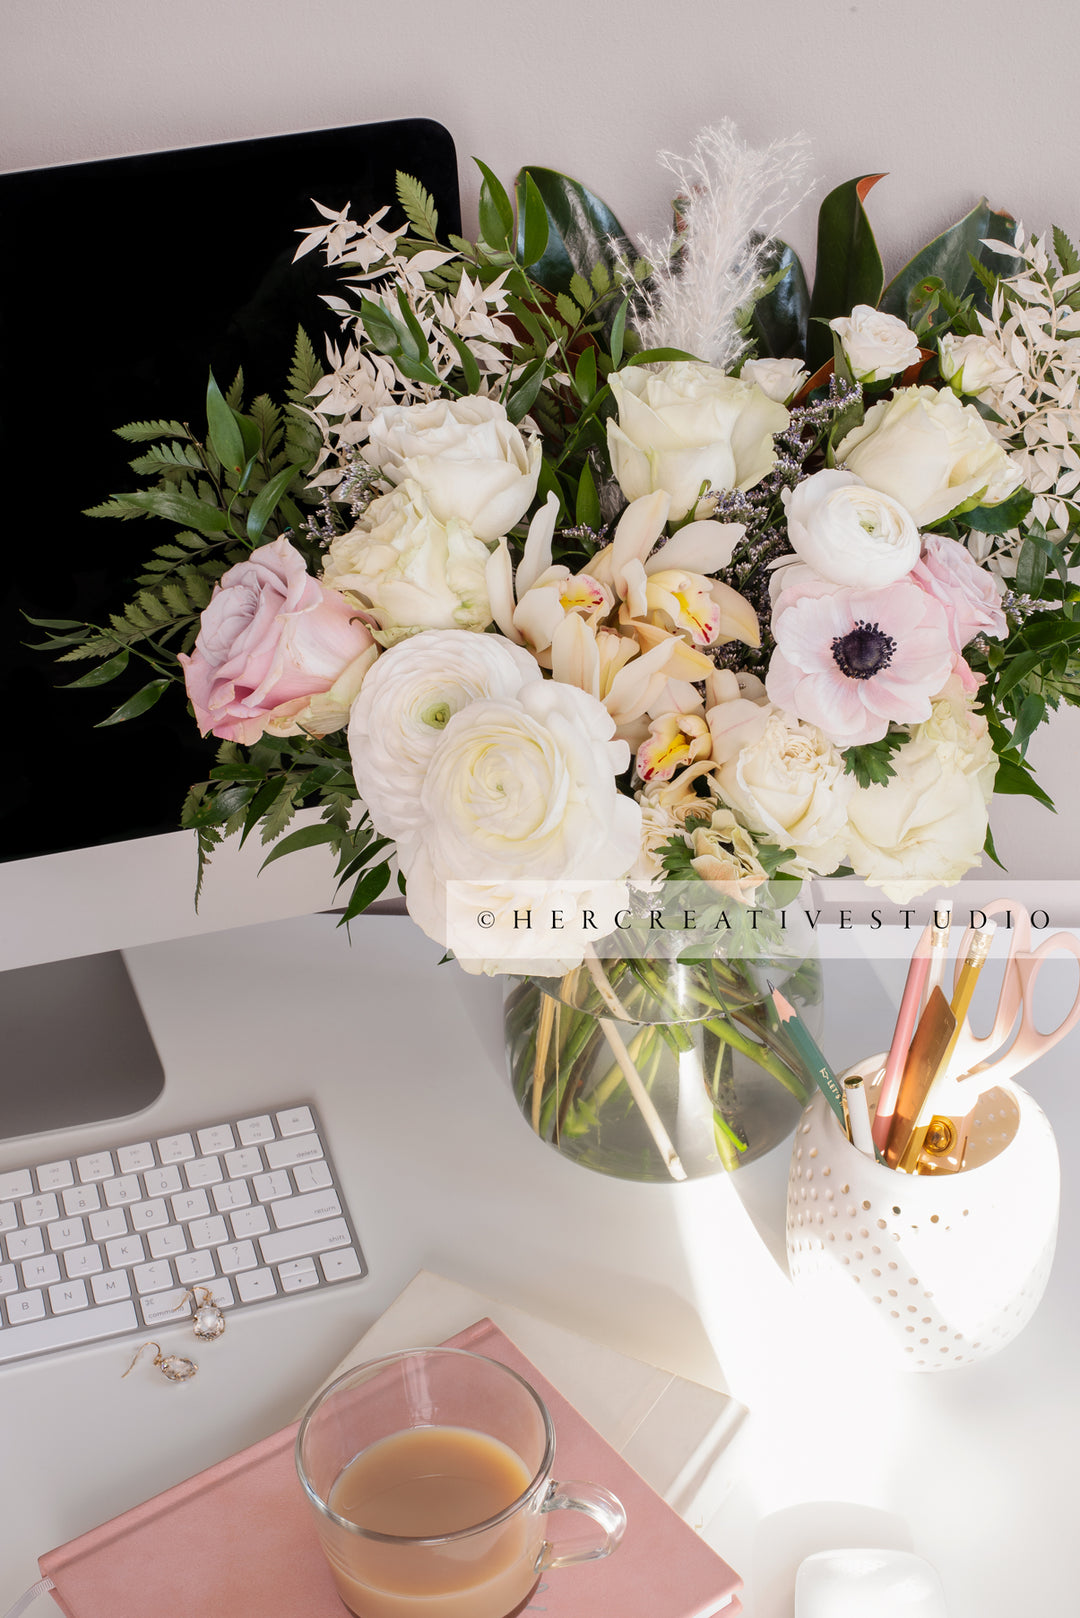 Flowers, & Pencil Holder in Sunny Workspace, Styled Stock Image